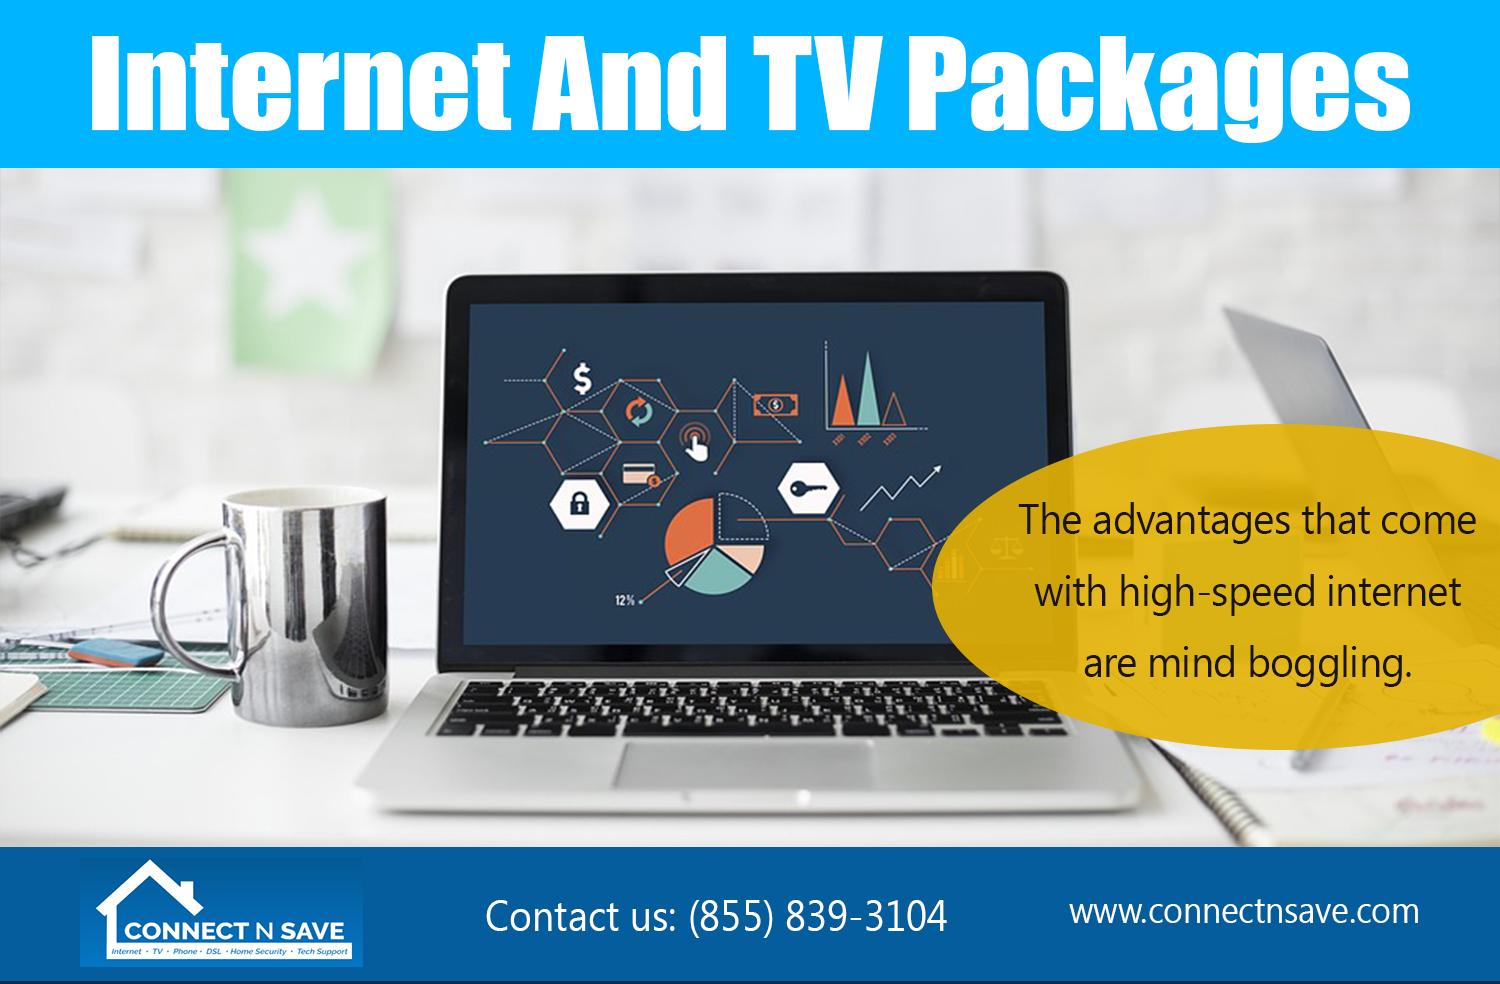 Internet And TV Packages | http://connectnsave.com/